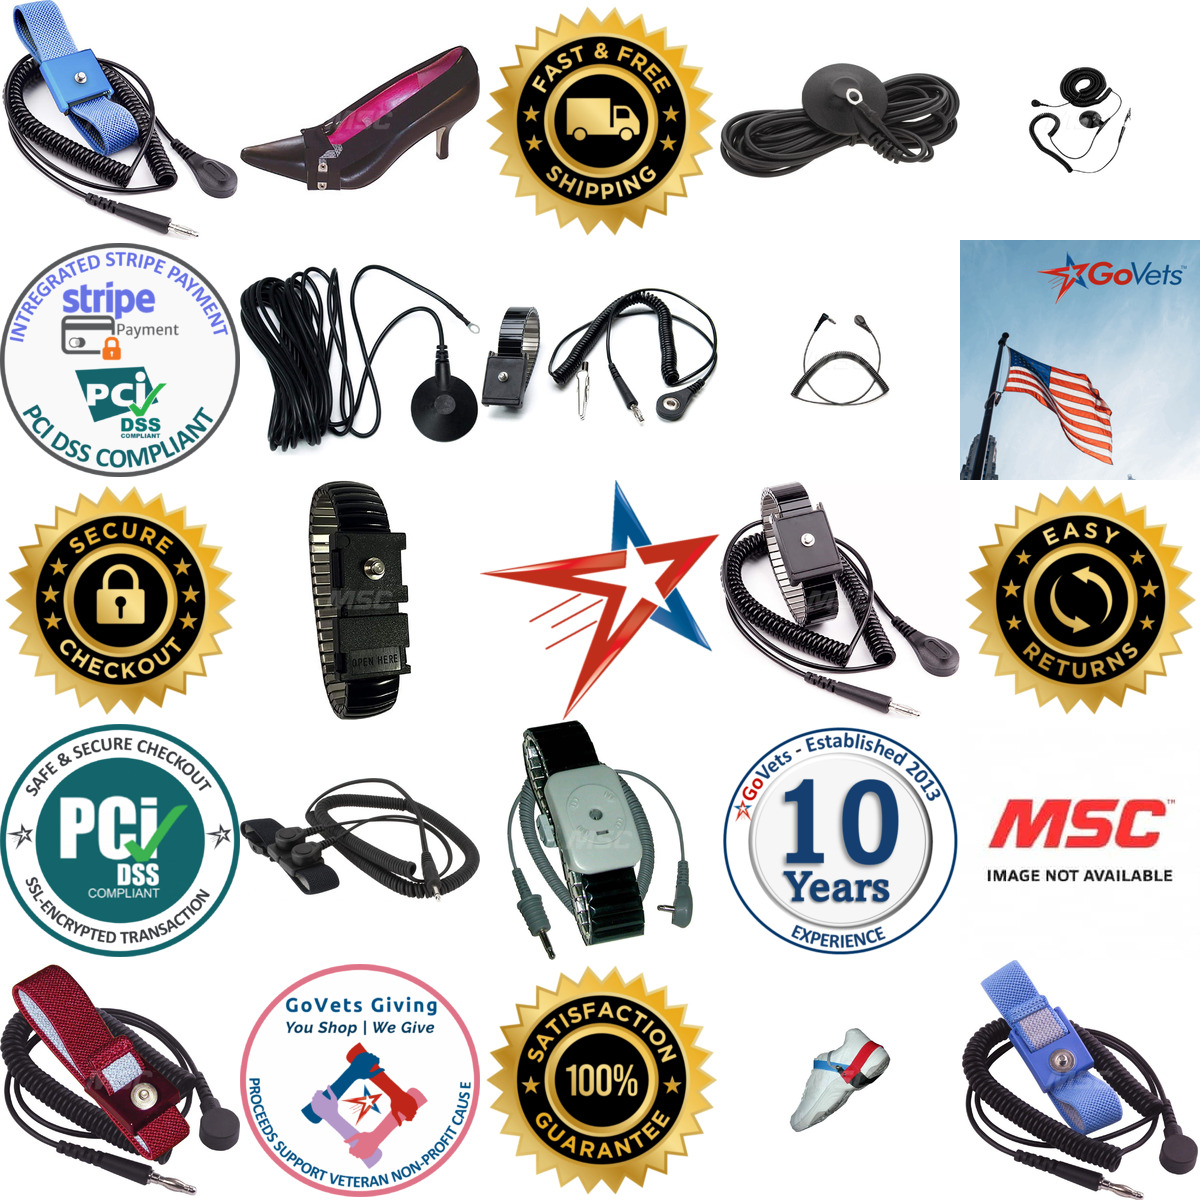 A selection of Grounding Cords Wrist and Shoe Straps products on GoVets